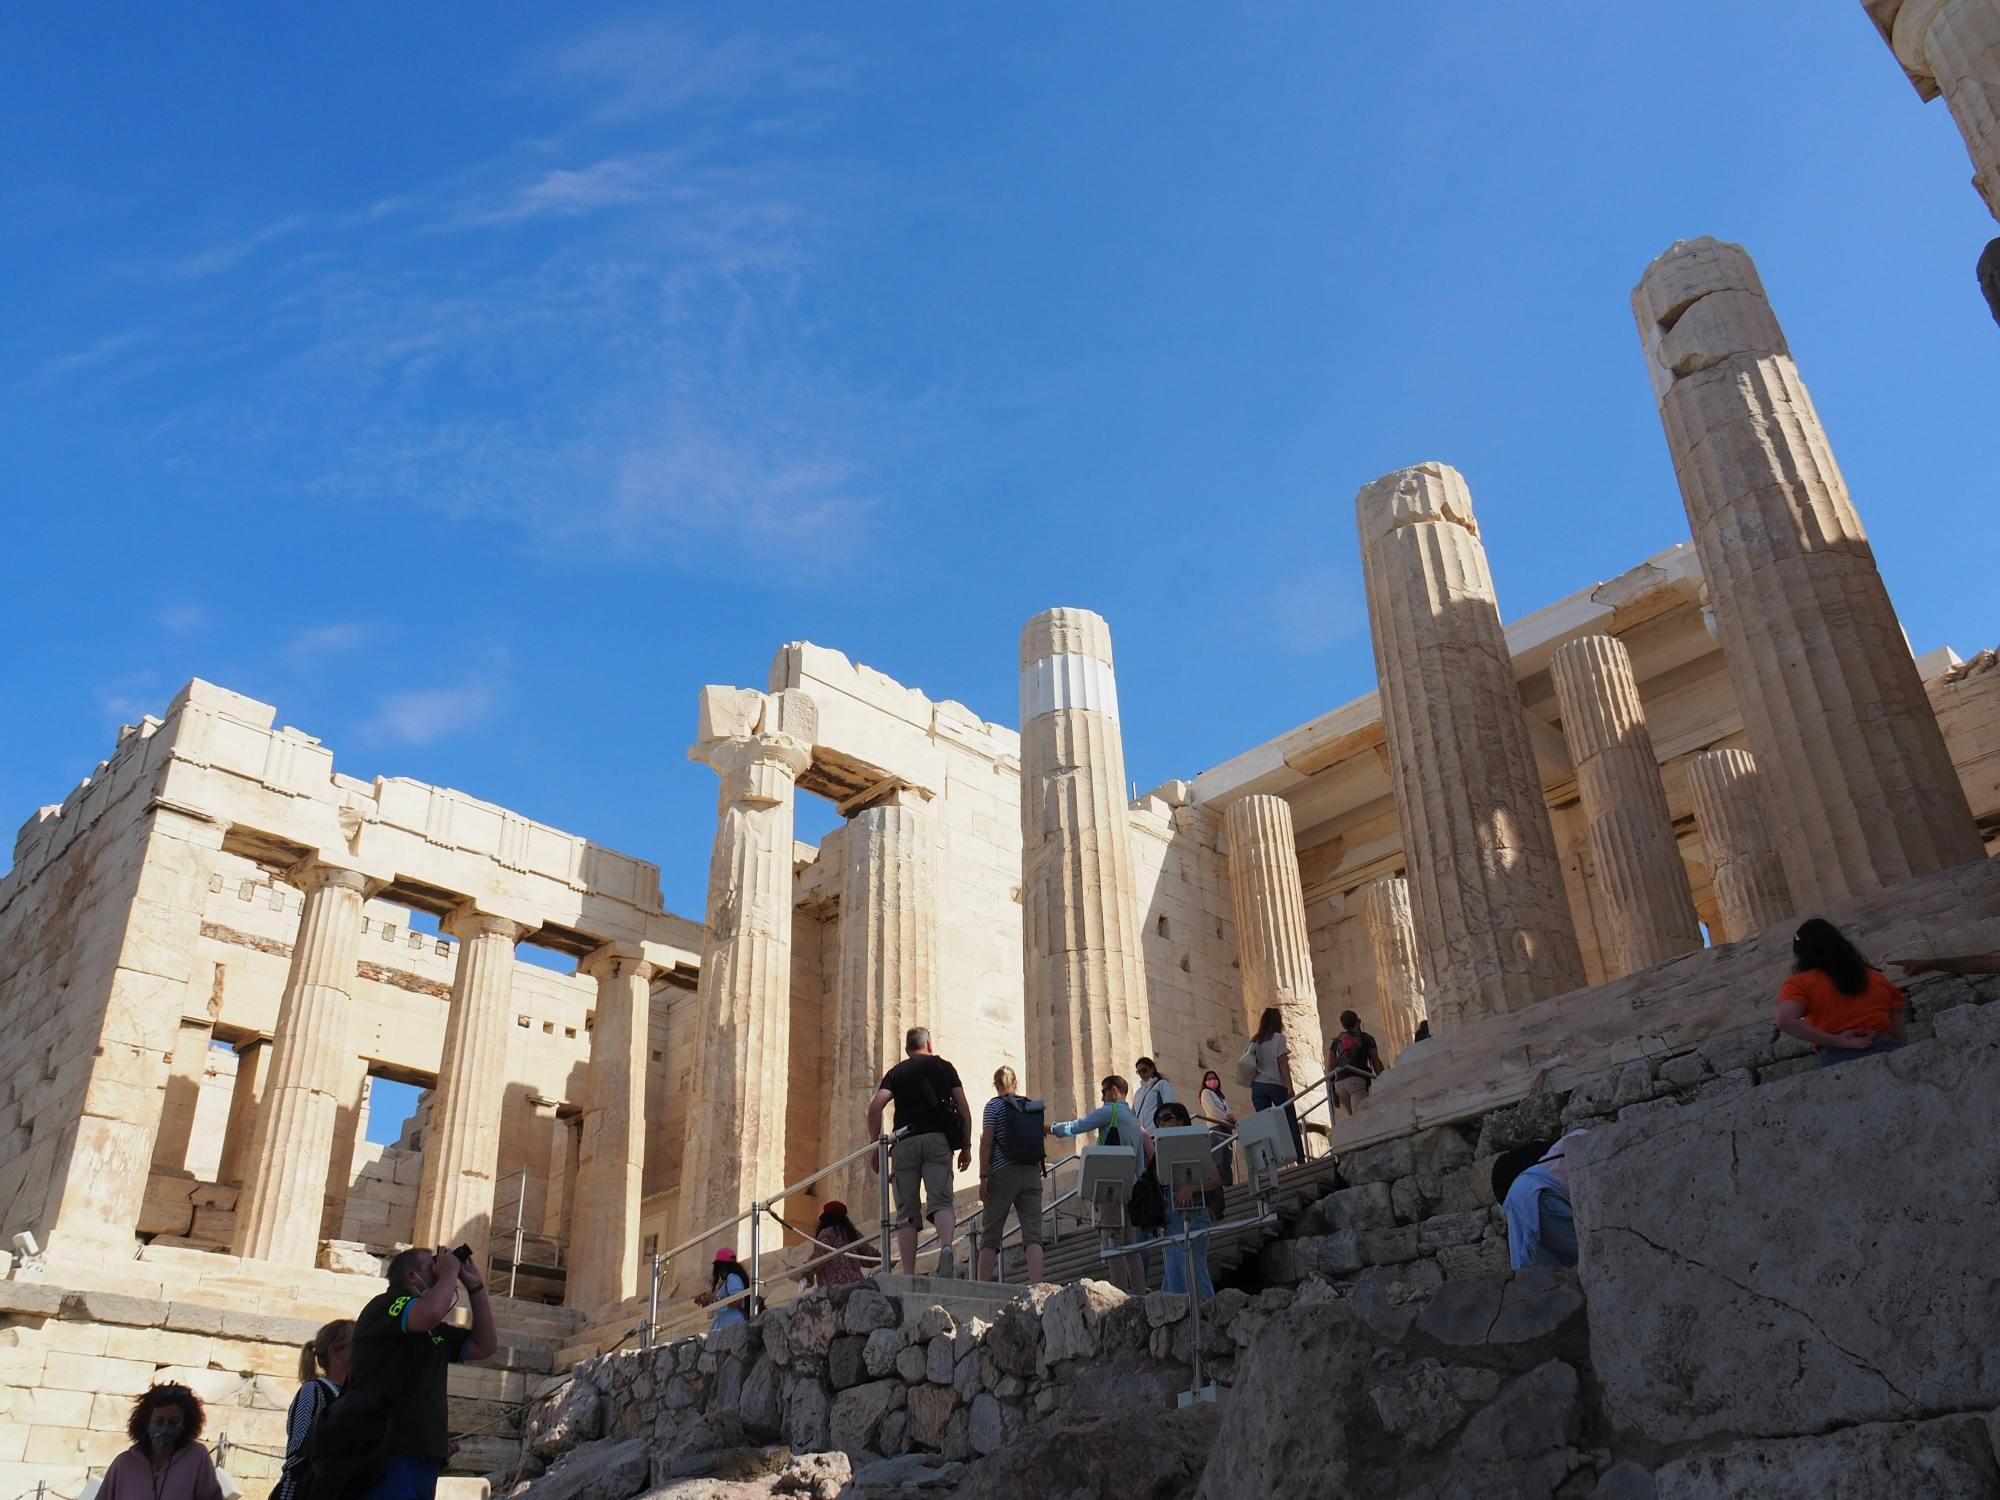 Early access to the Acropolis and Acropolis Museum walking tour